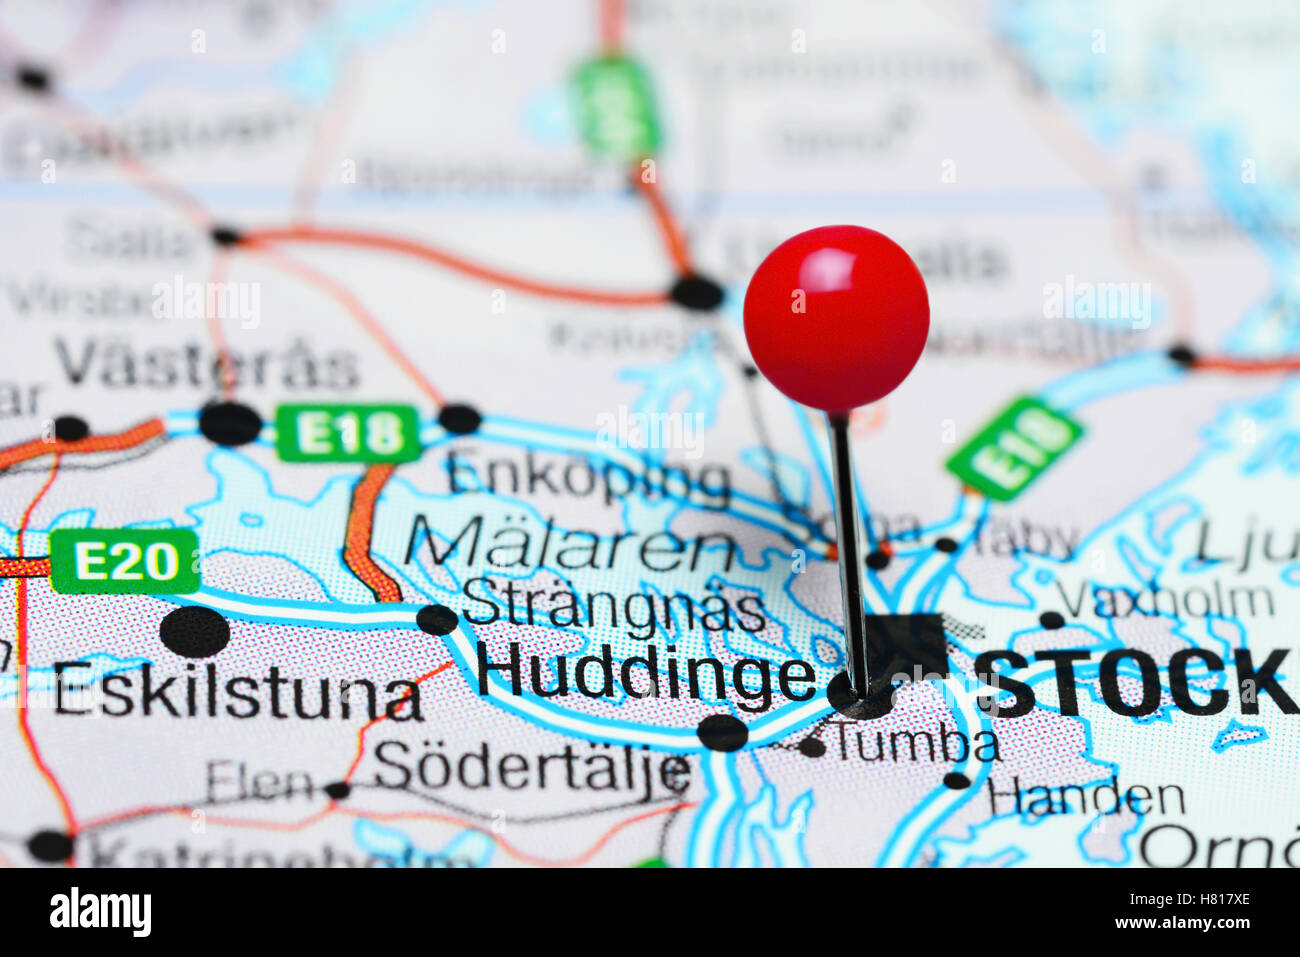 Huddinge pinned on a map of Sweden Stock Photo